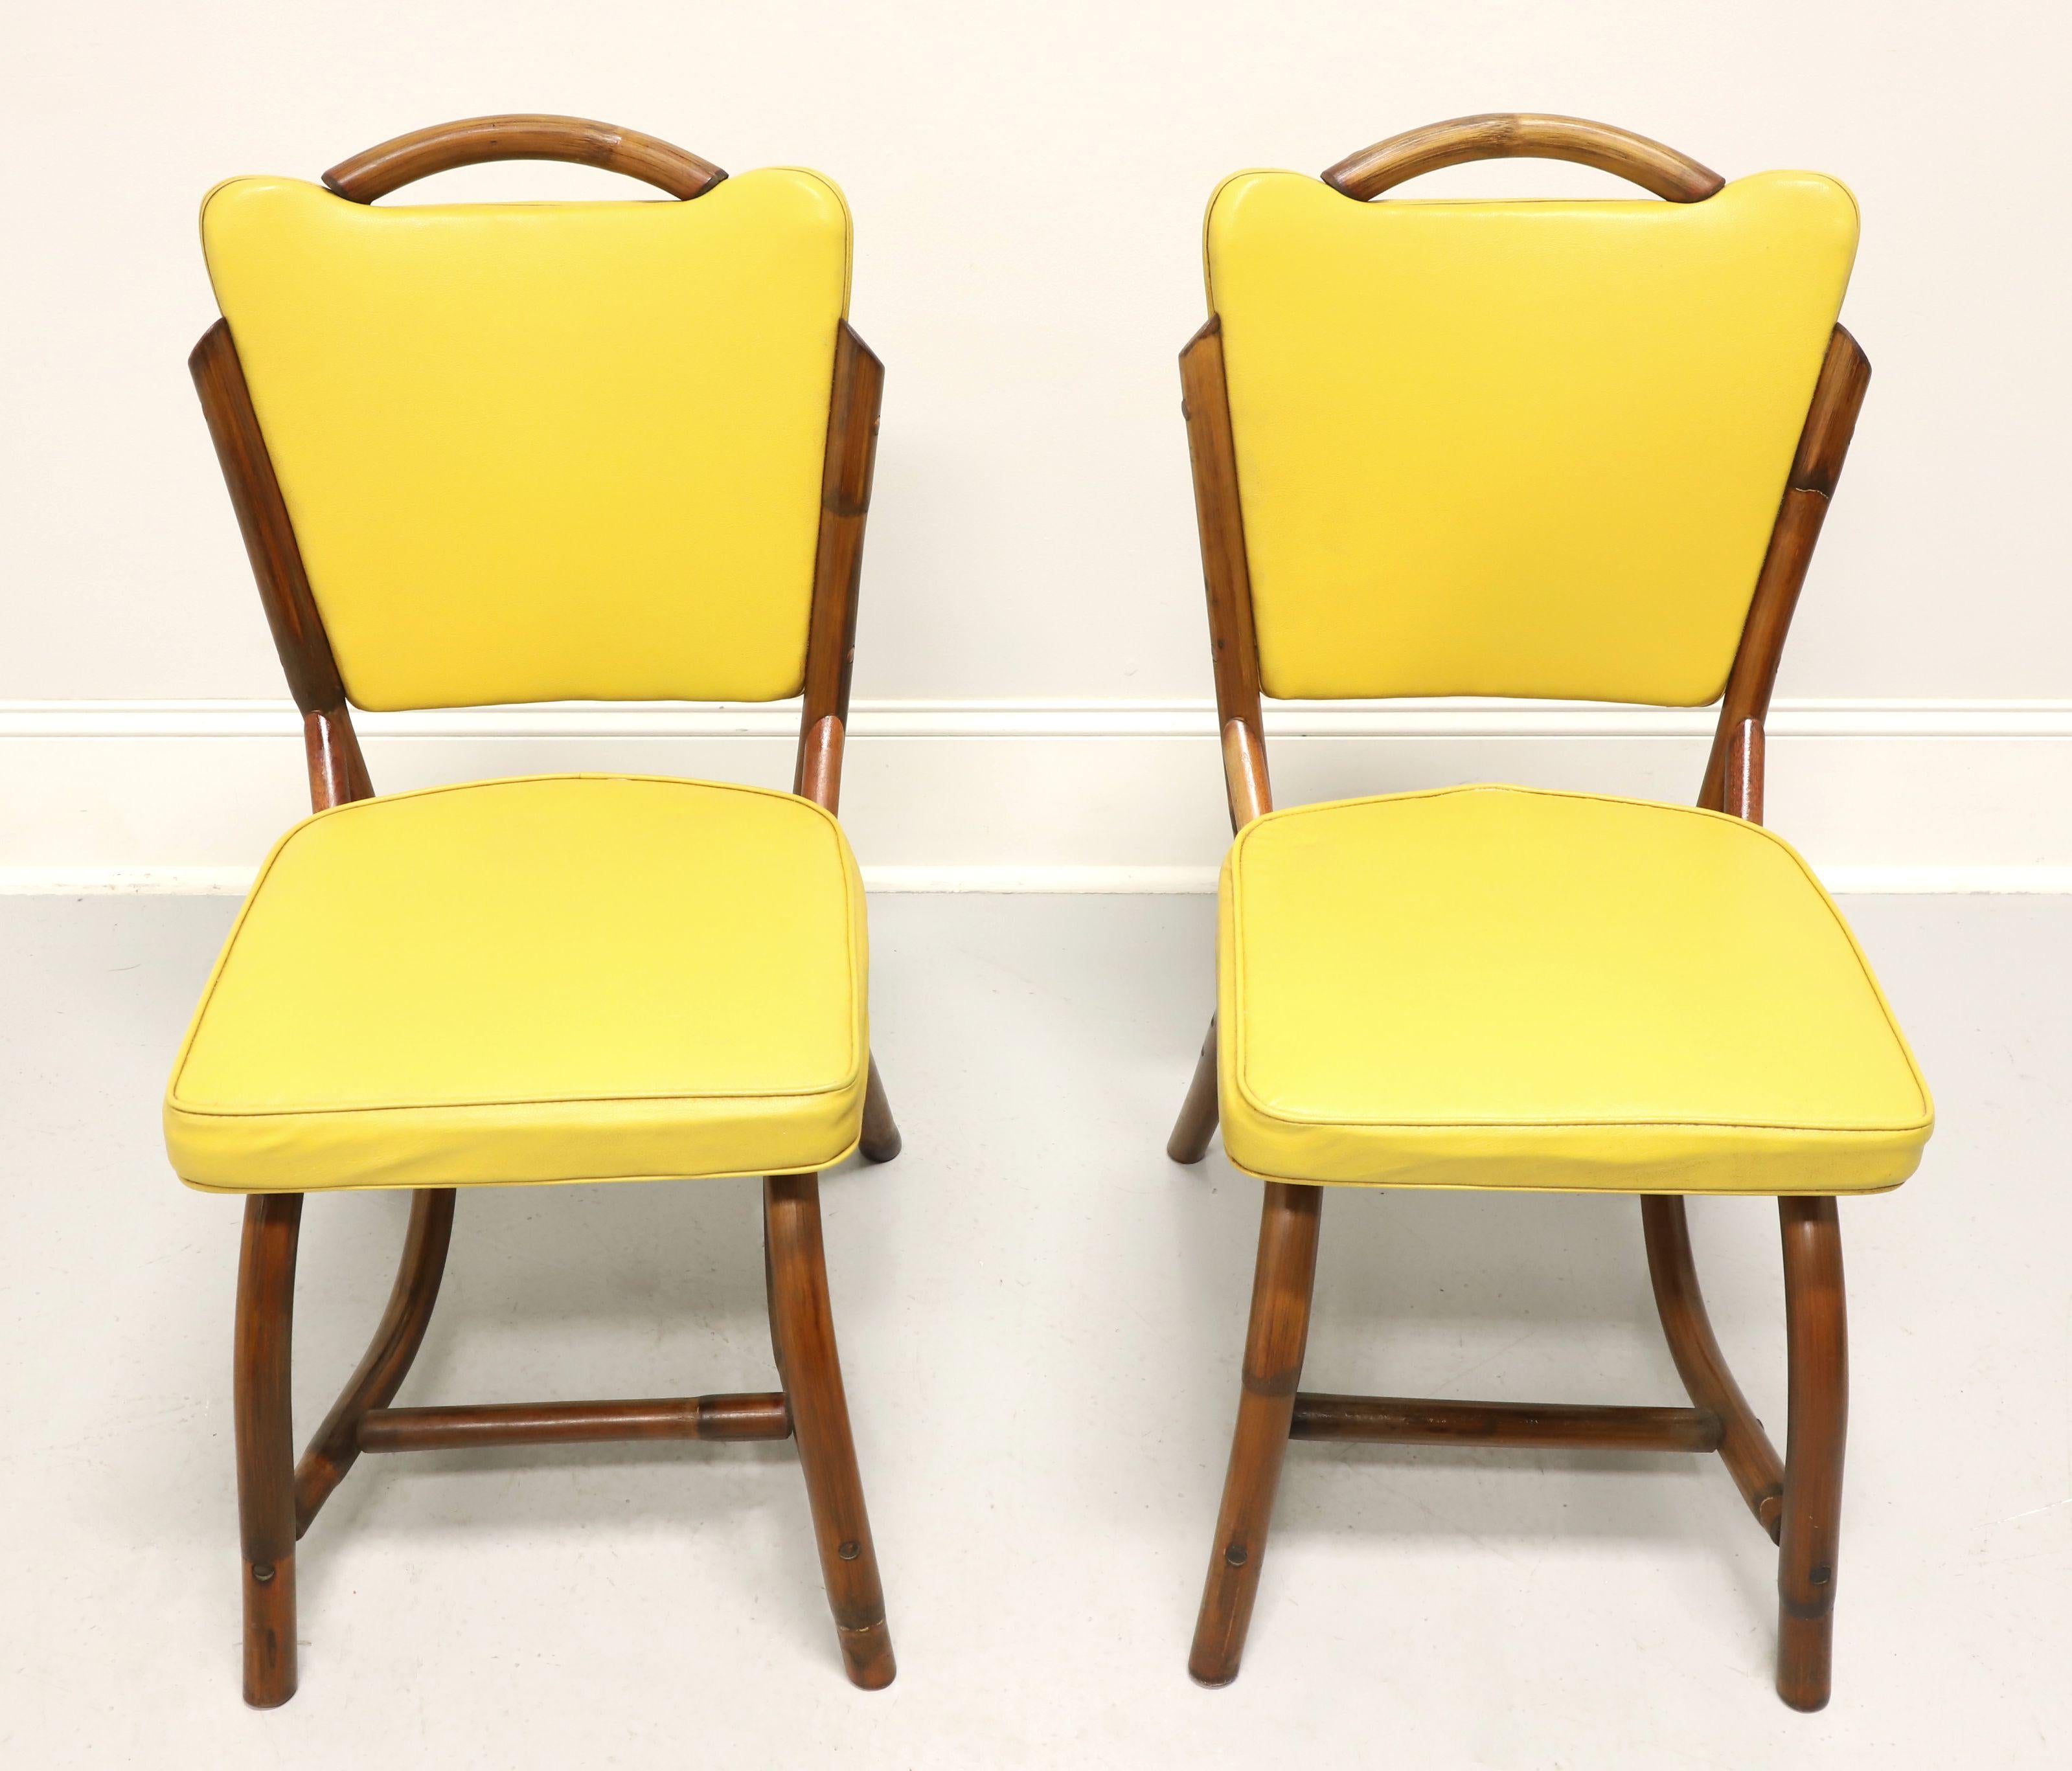 A pair of mid-20th century Coastal style dining side chairs by Bam-Tan Products. Rattan with a distinctive Mid-Century Modern style, rounded back with flared corner yellow colored vinyl upholstered backrest, arched legs and stretchers supporting